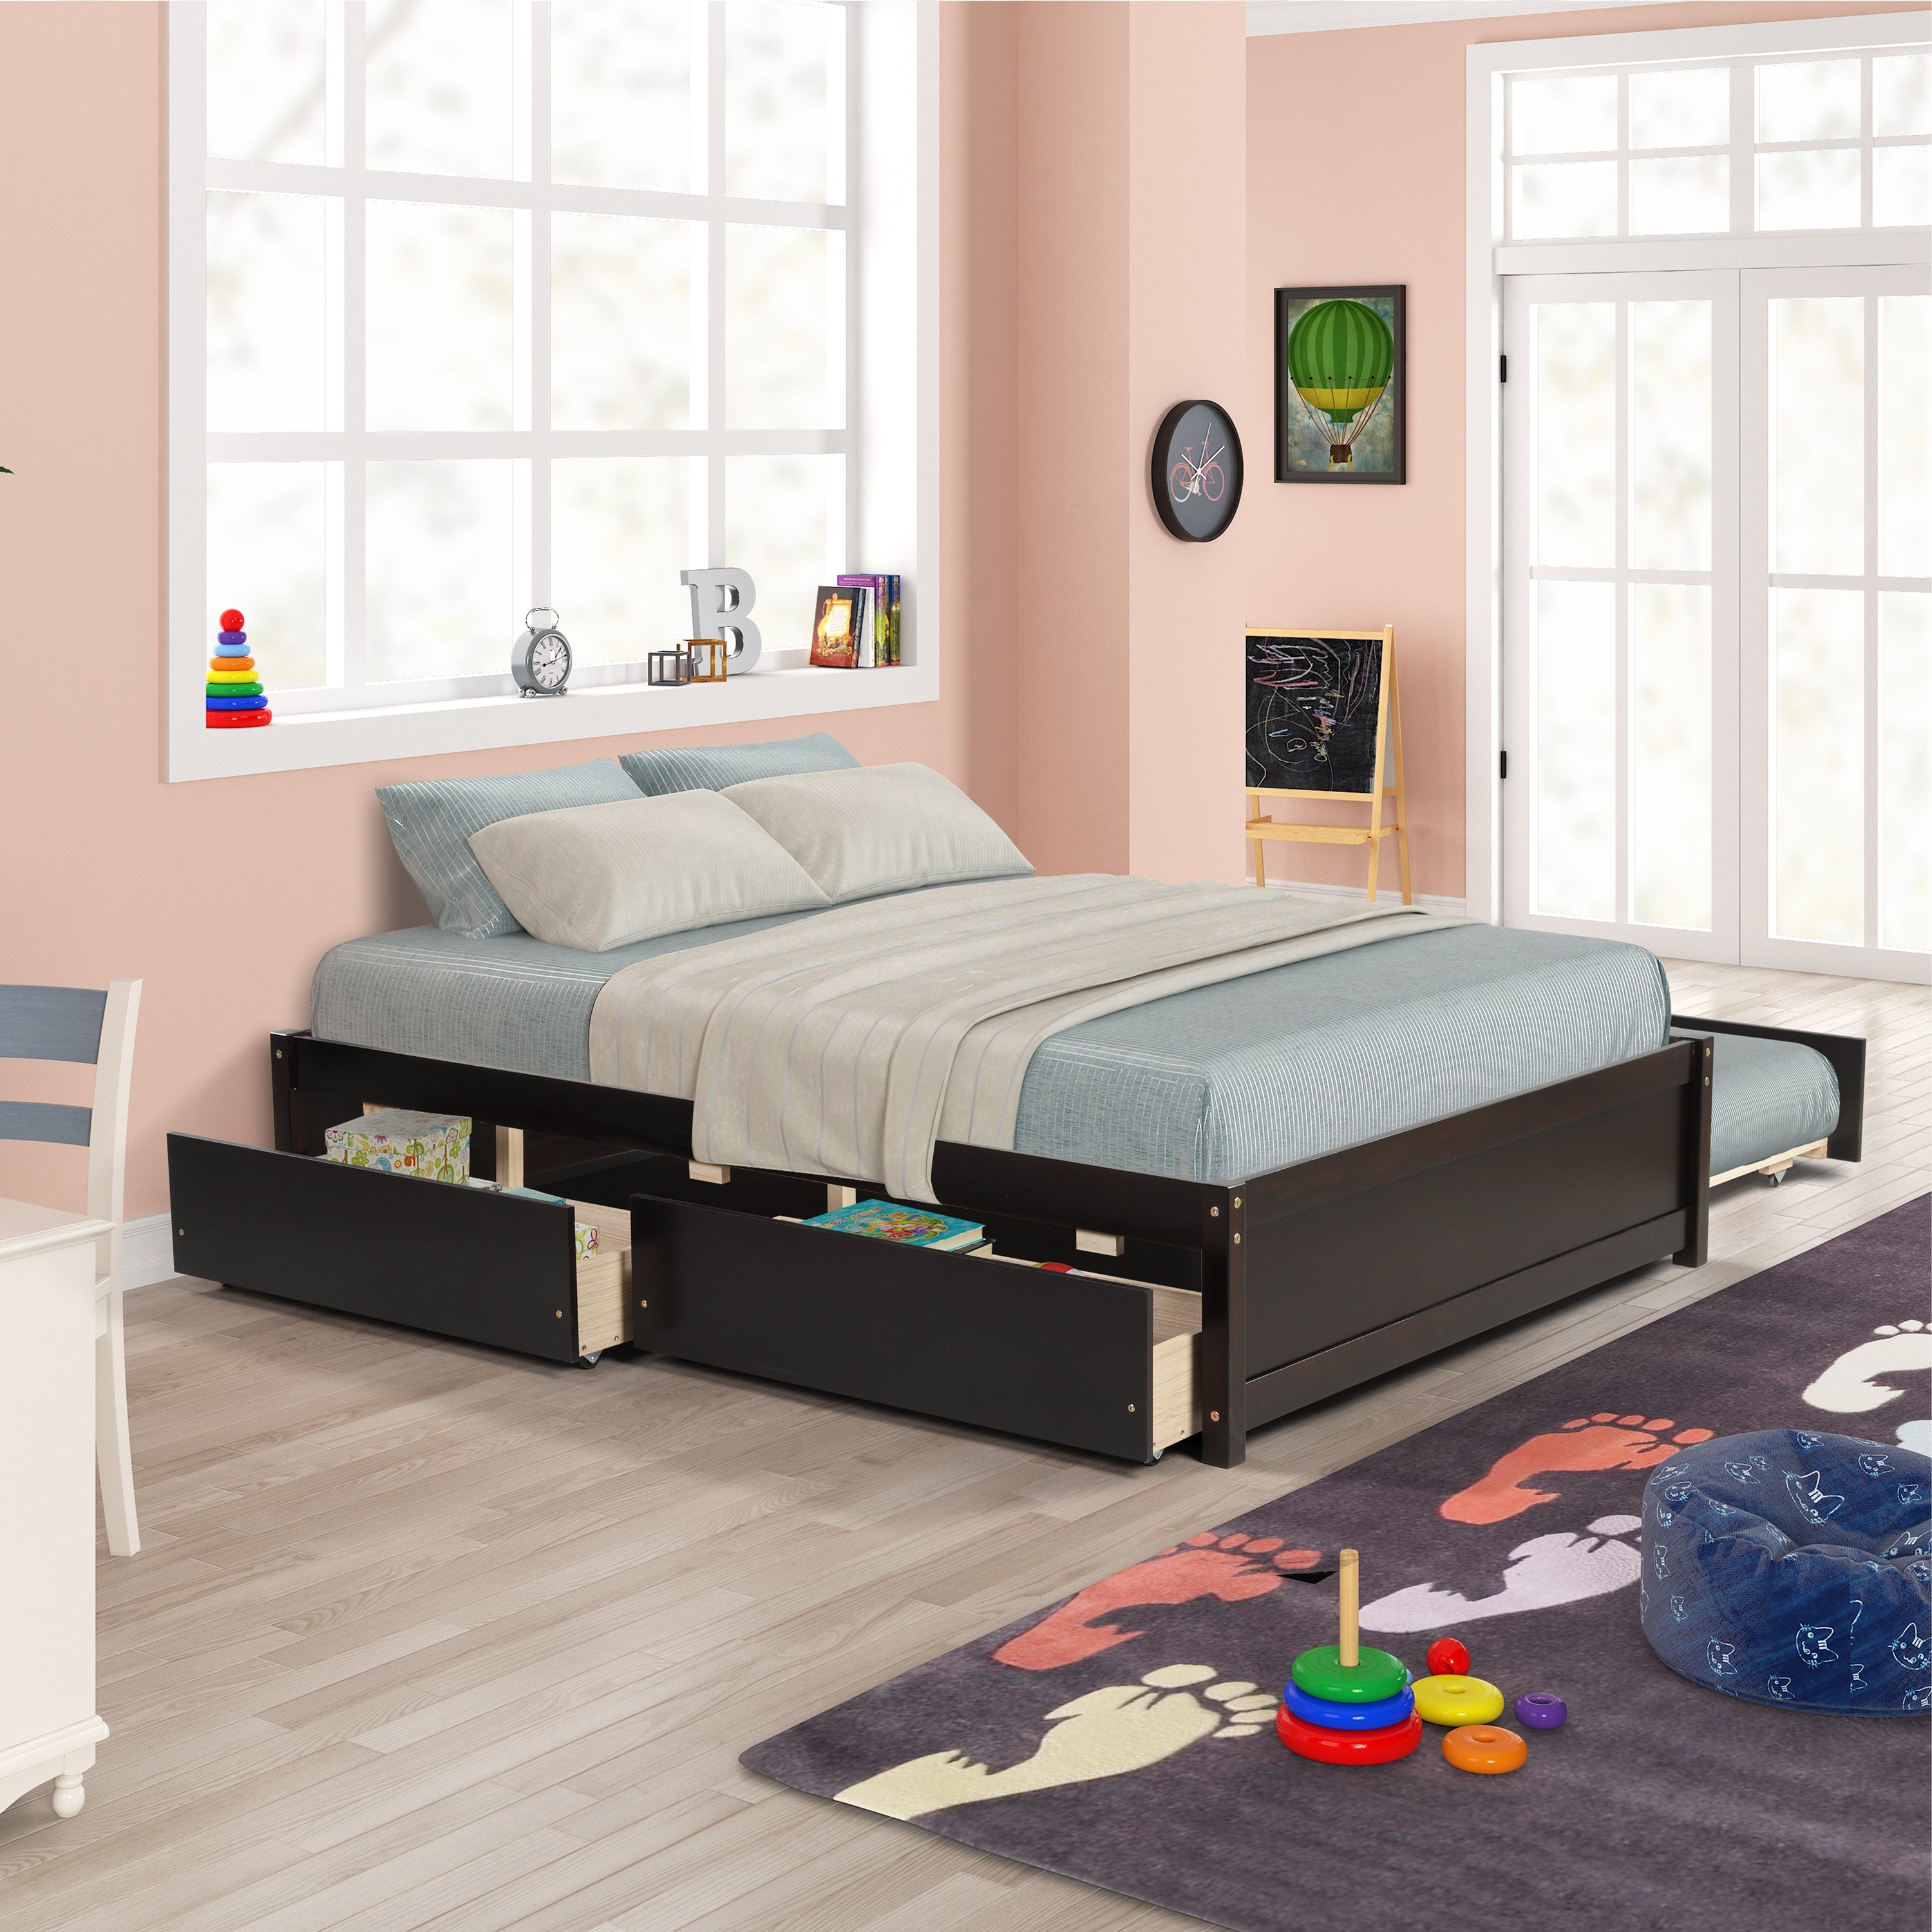 Ouyessir Full Size Platform Bed, Solid Wood Full Size Bed Frame with Twin Size Trundle Bed and 2 Storage Drawers,Storage Bed for Kids Teens Bedroom,No Spring Box Needed (Espresso)